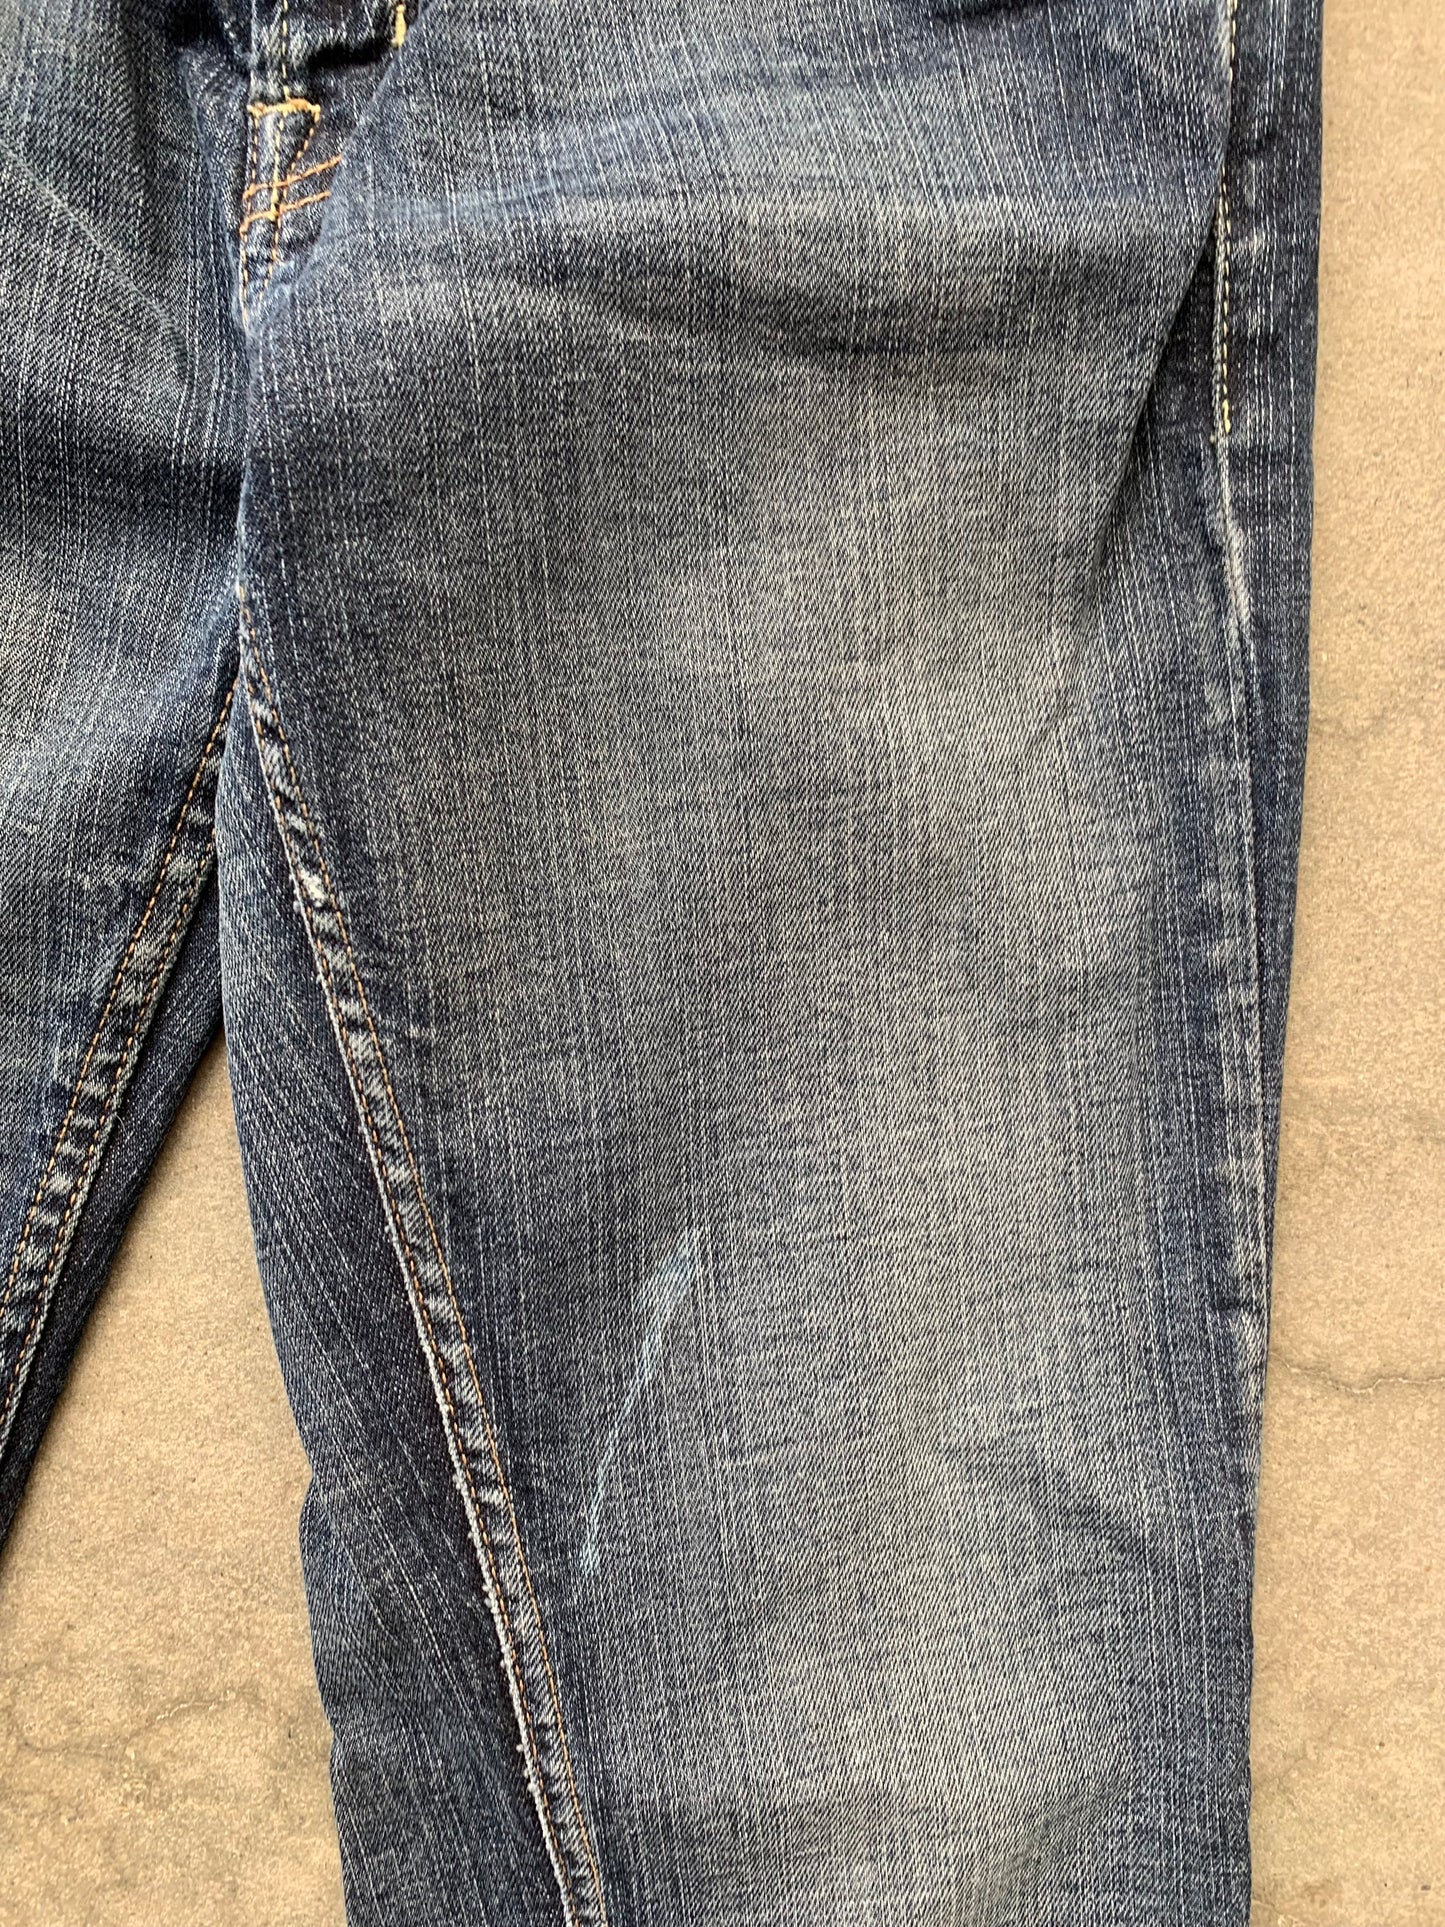 (25”) Y2K Guess Flares